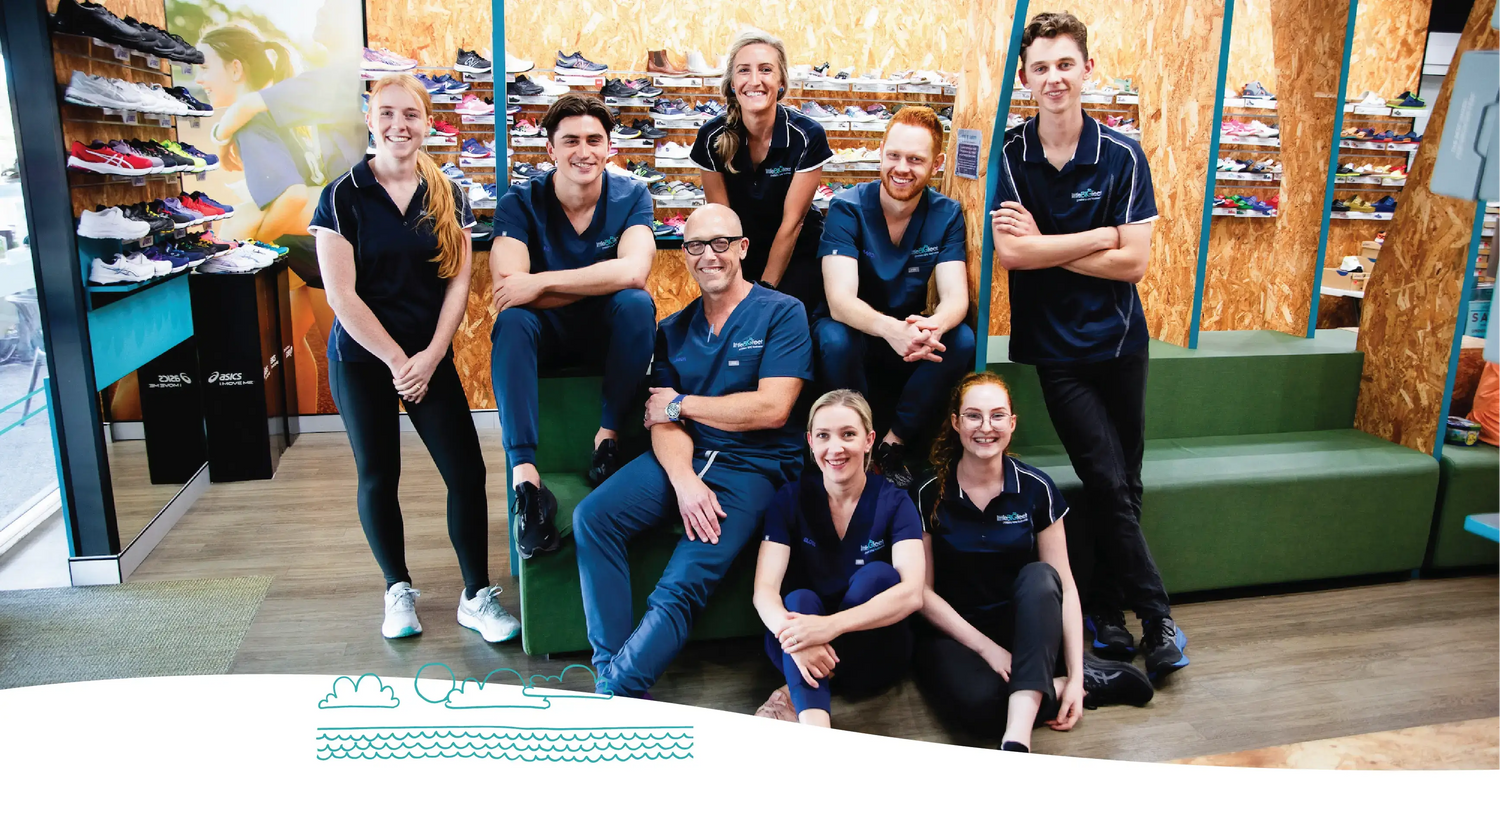 Little Big Feet Team smiling in store